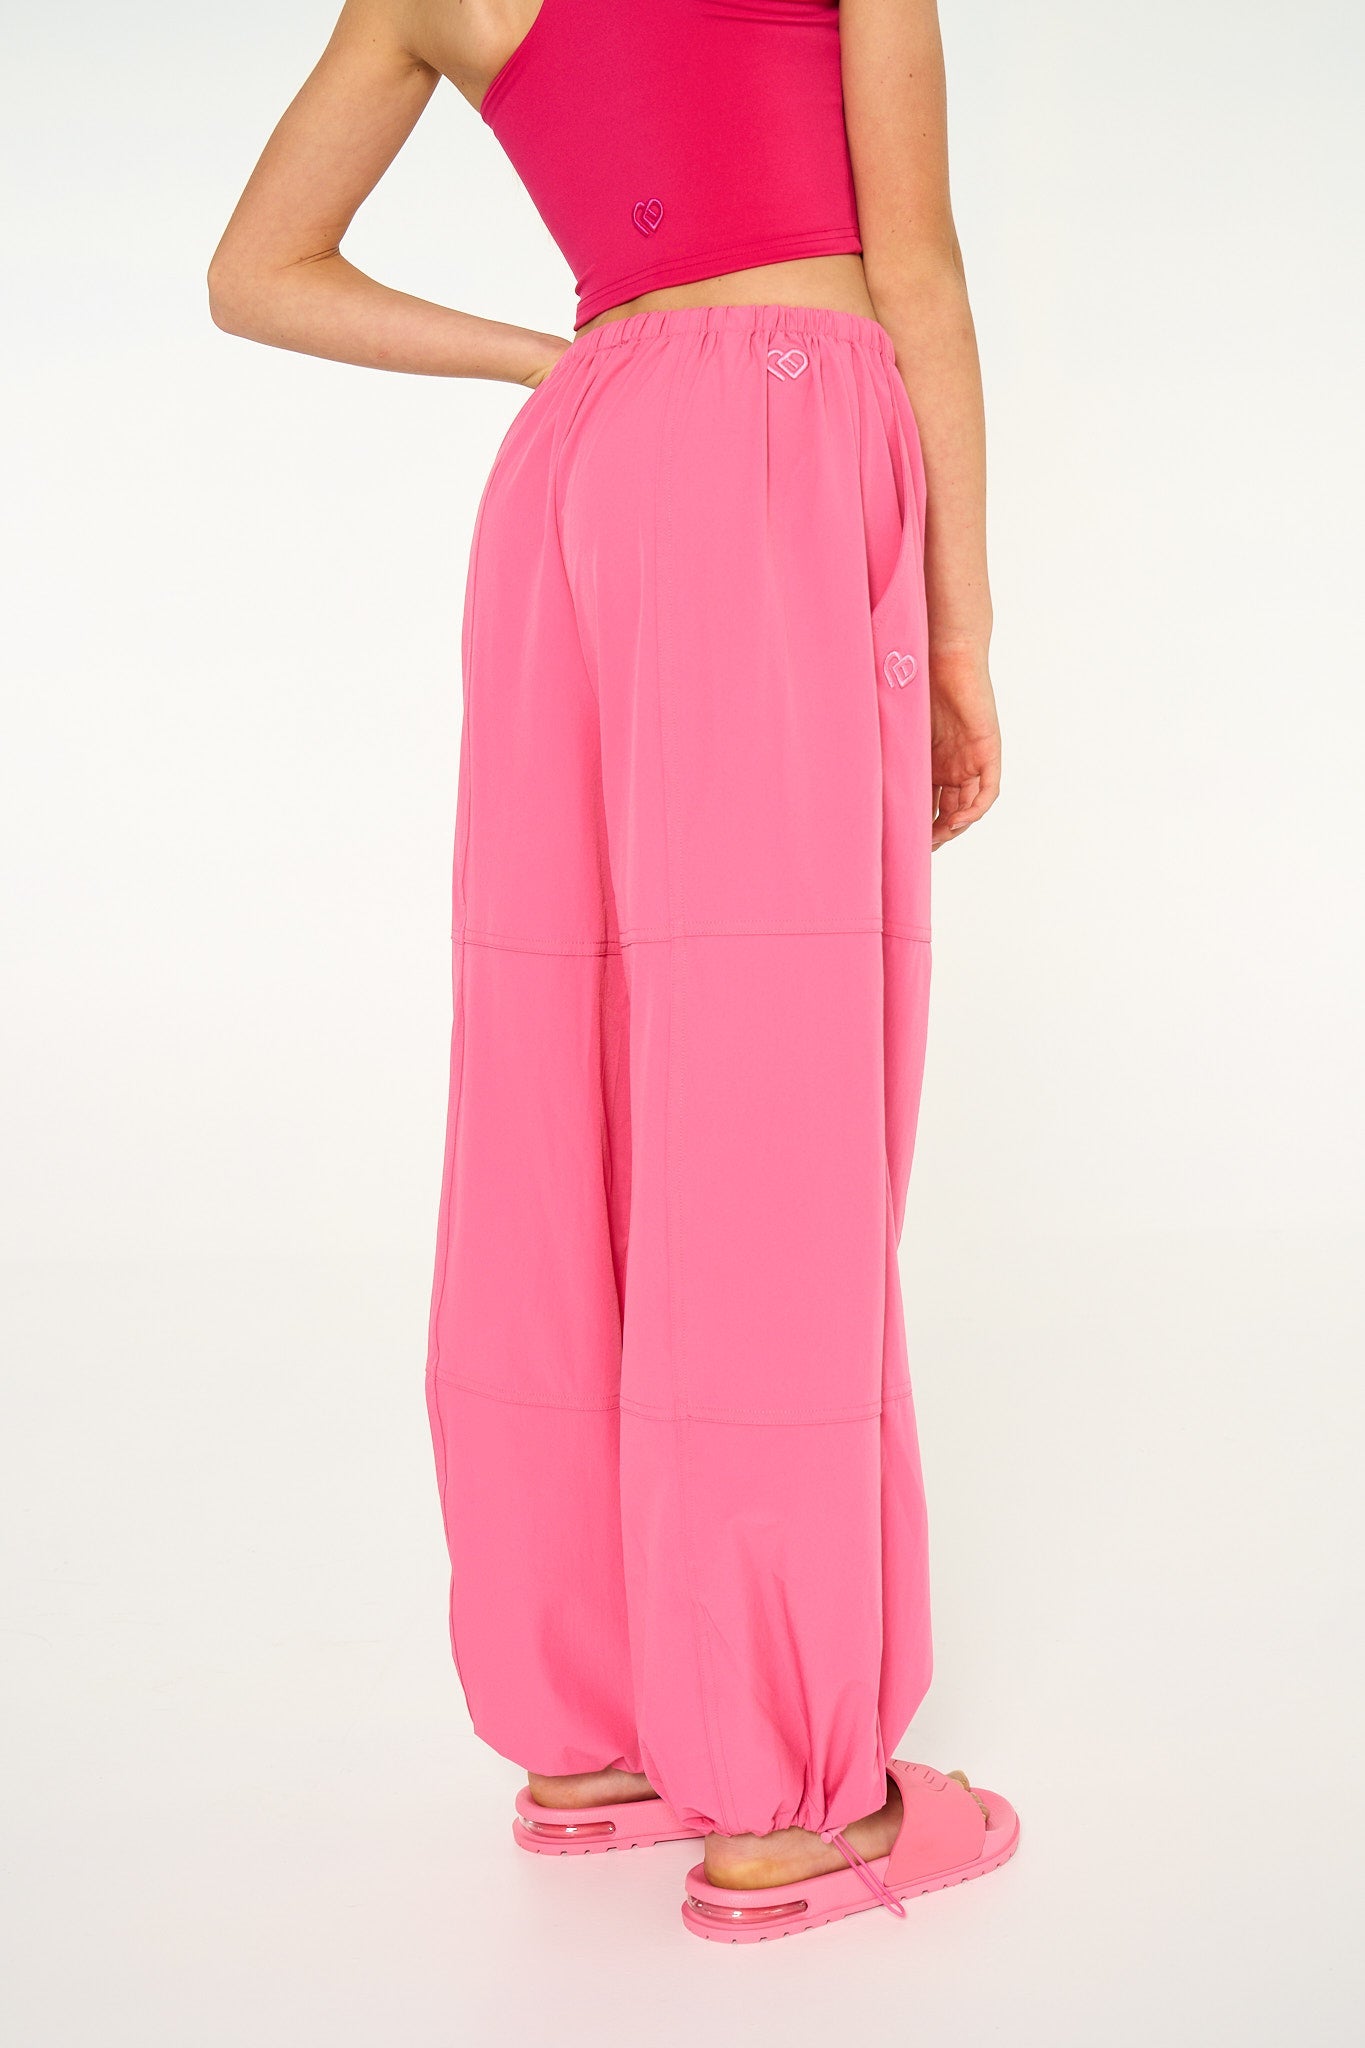 Forever 21 - Forever 21 Drawstring Low Rise Parachute Pants Hot Pink